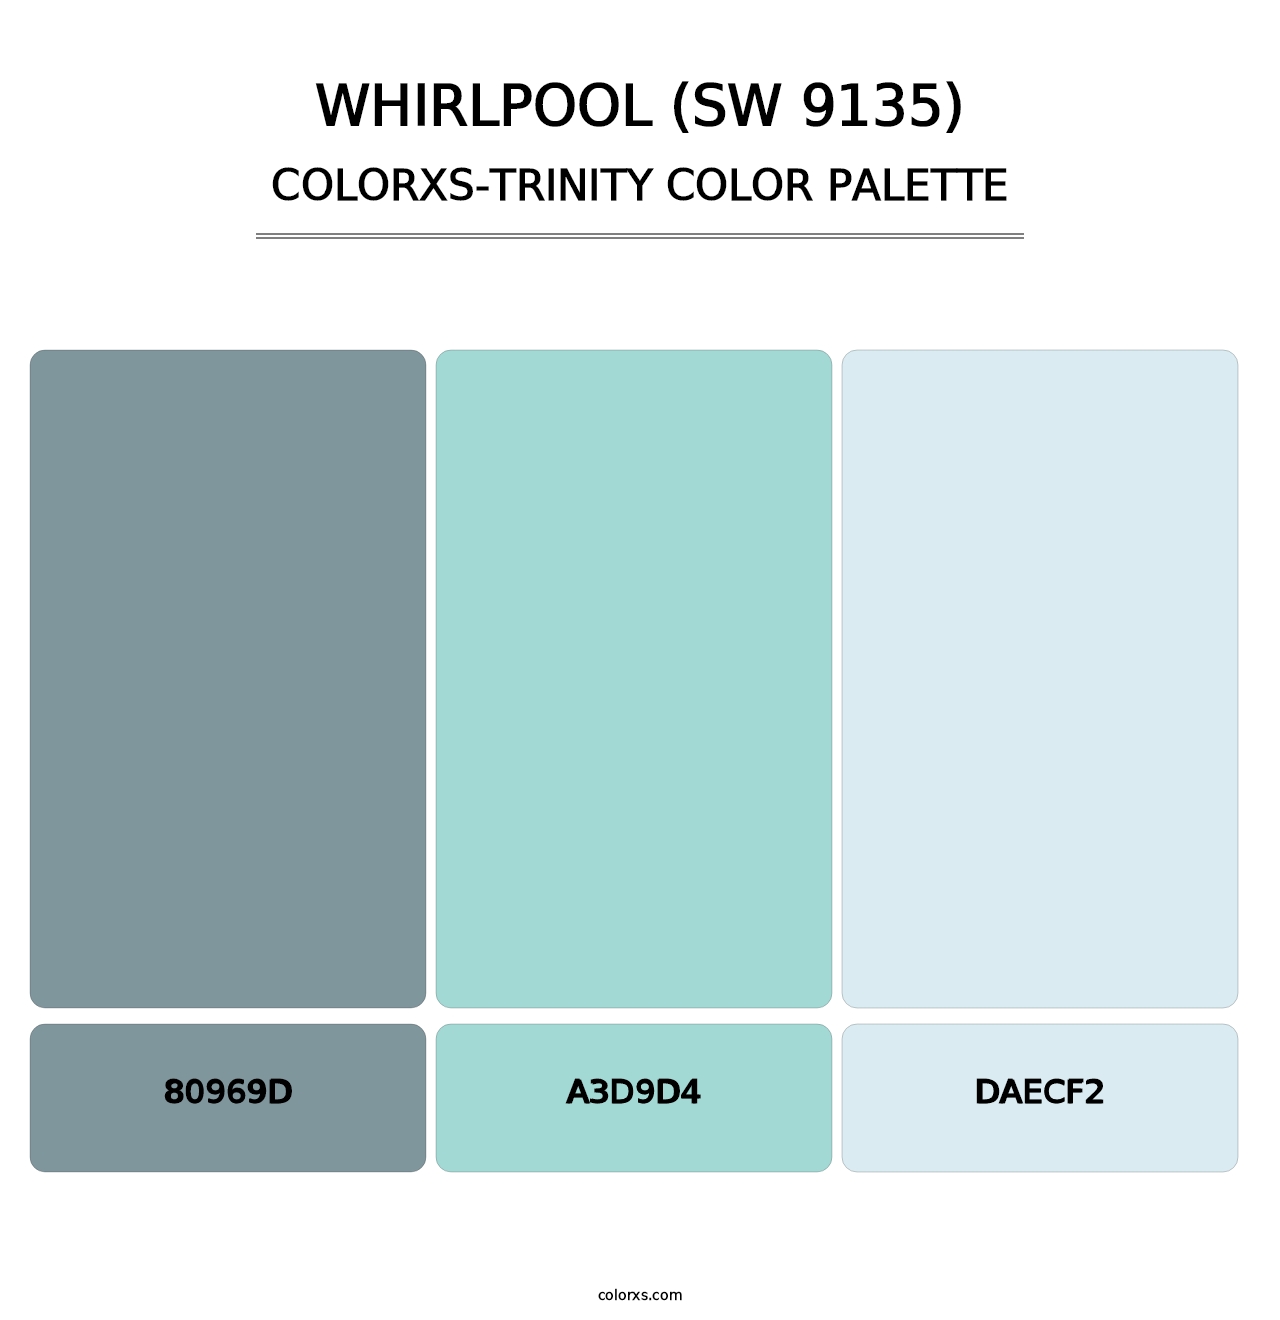 Whirlpool (SW 9135) - Colorxs Trinity Palette